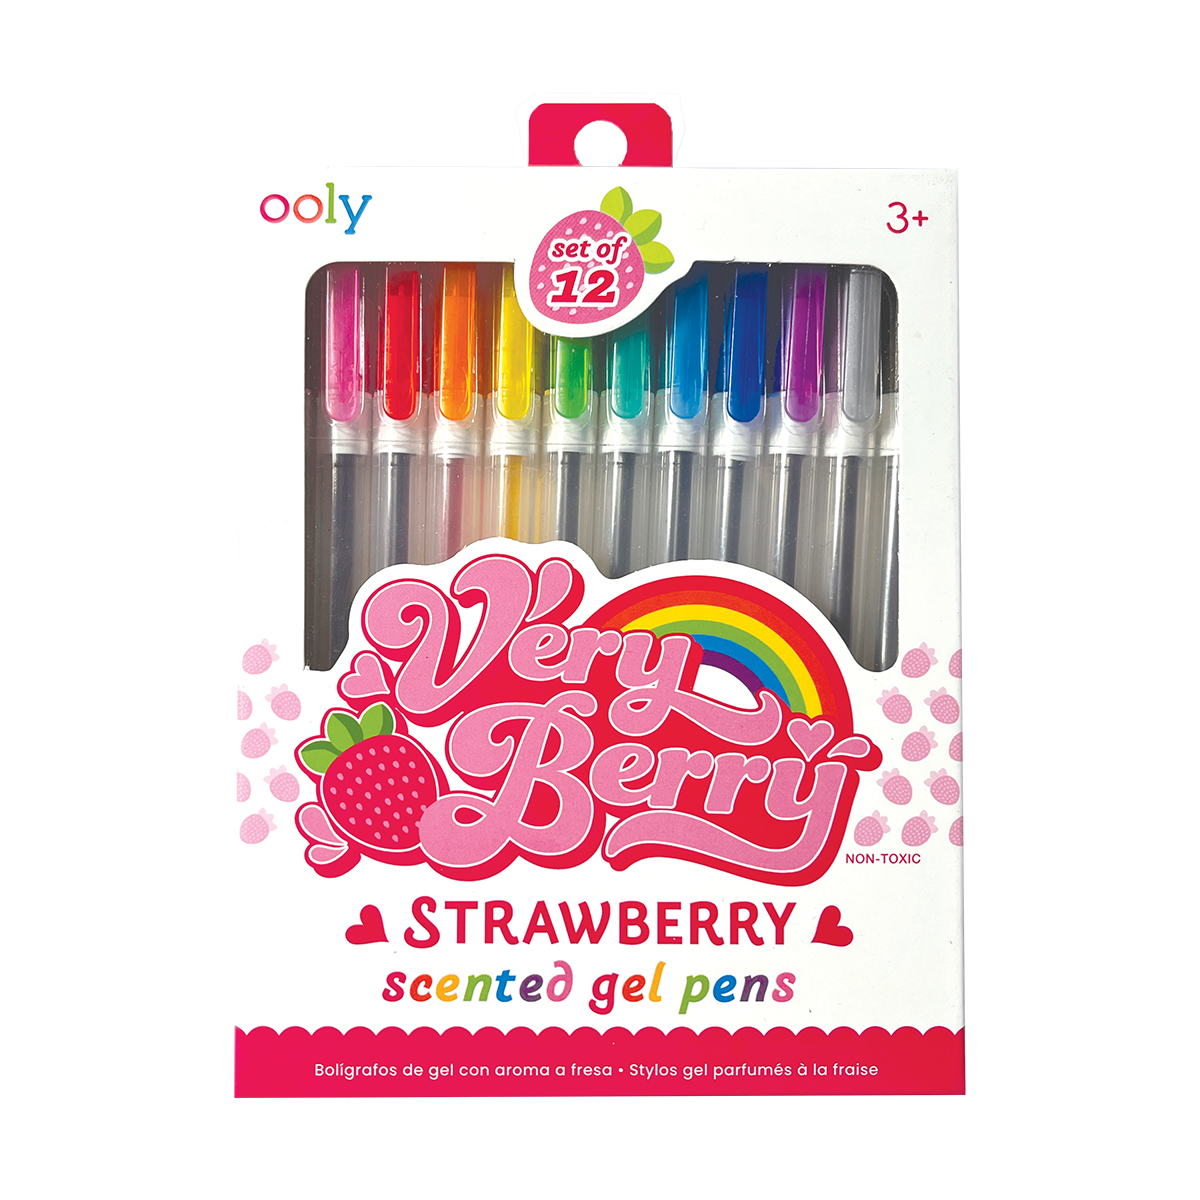 OOLY Very Berry Strawberry Scented Gel Pens in packaging